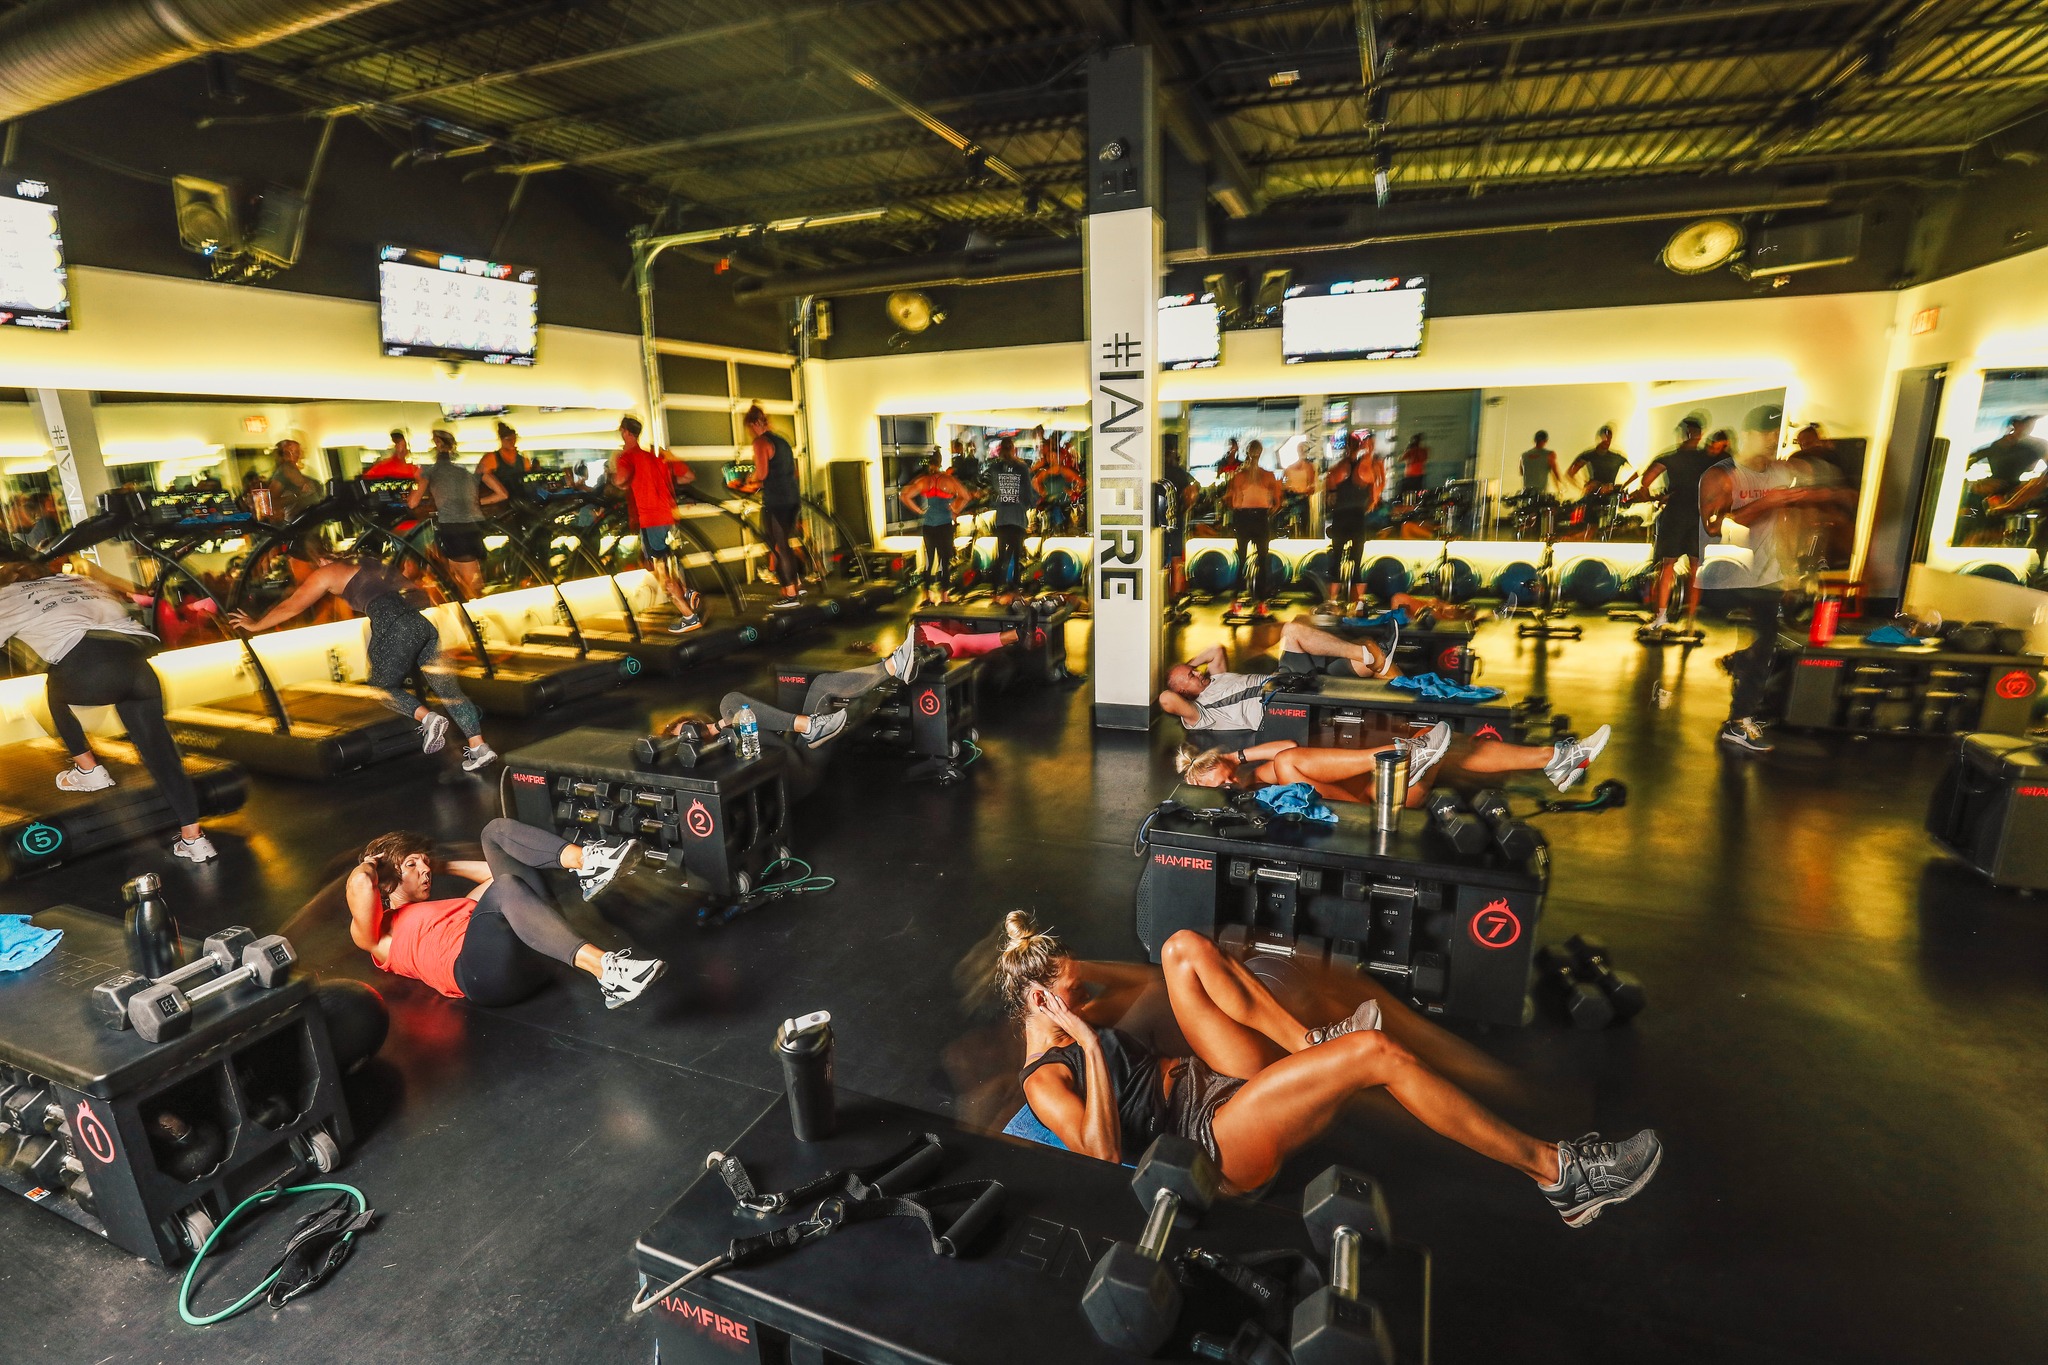 group workout class at ultimate workout, one of the metro's premier gyms in Omaha